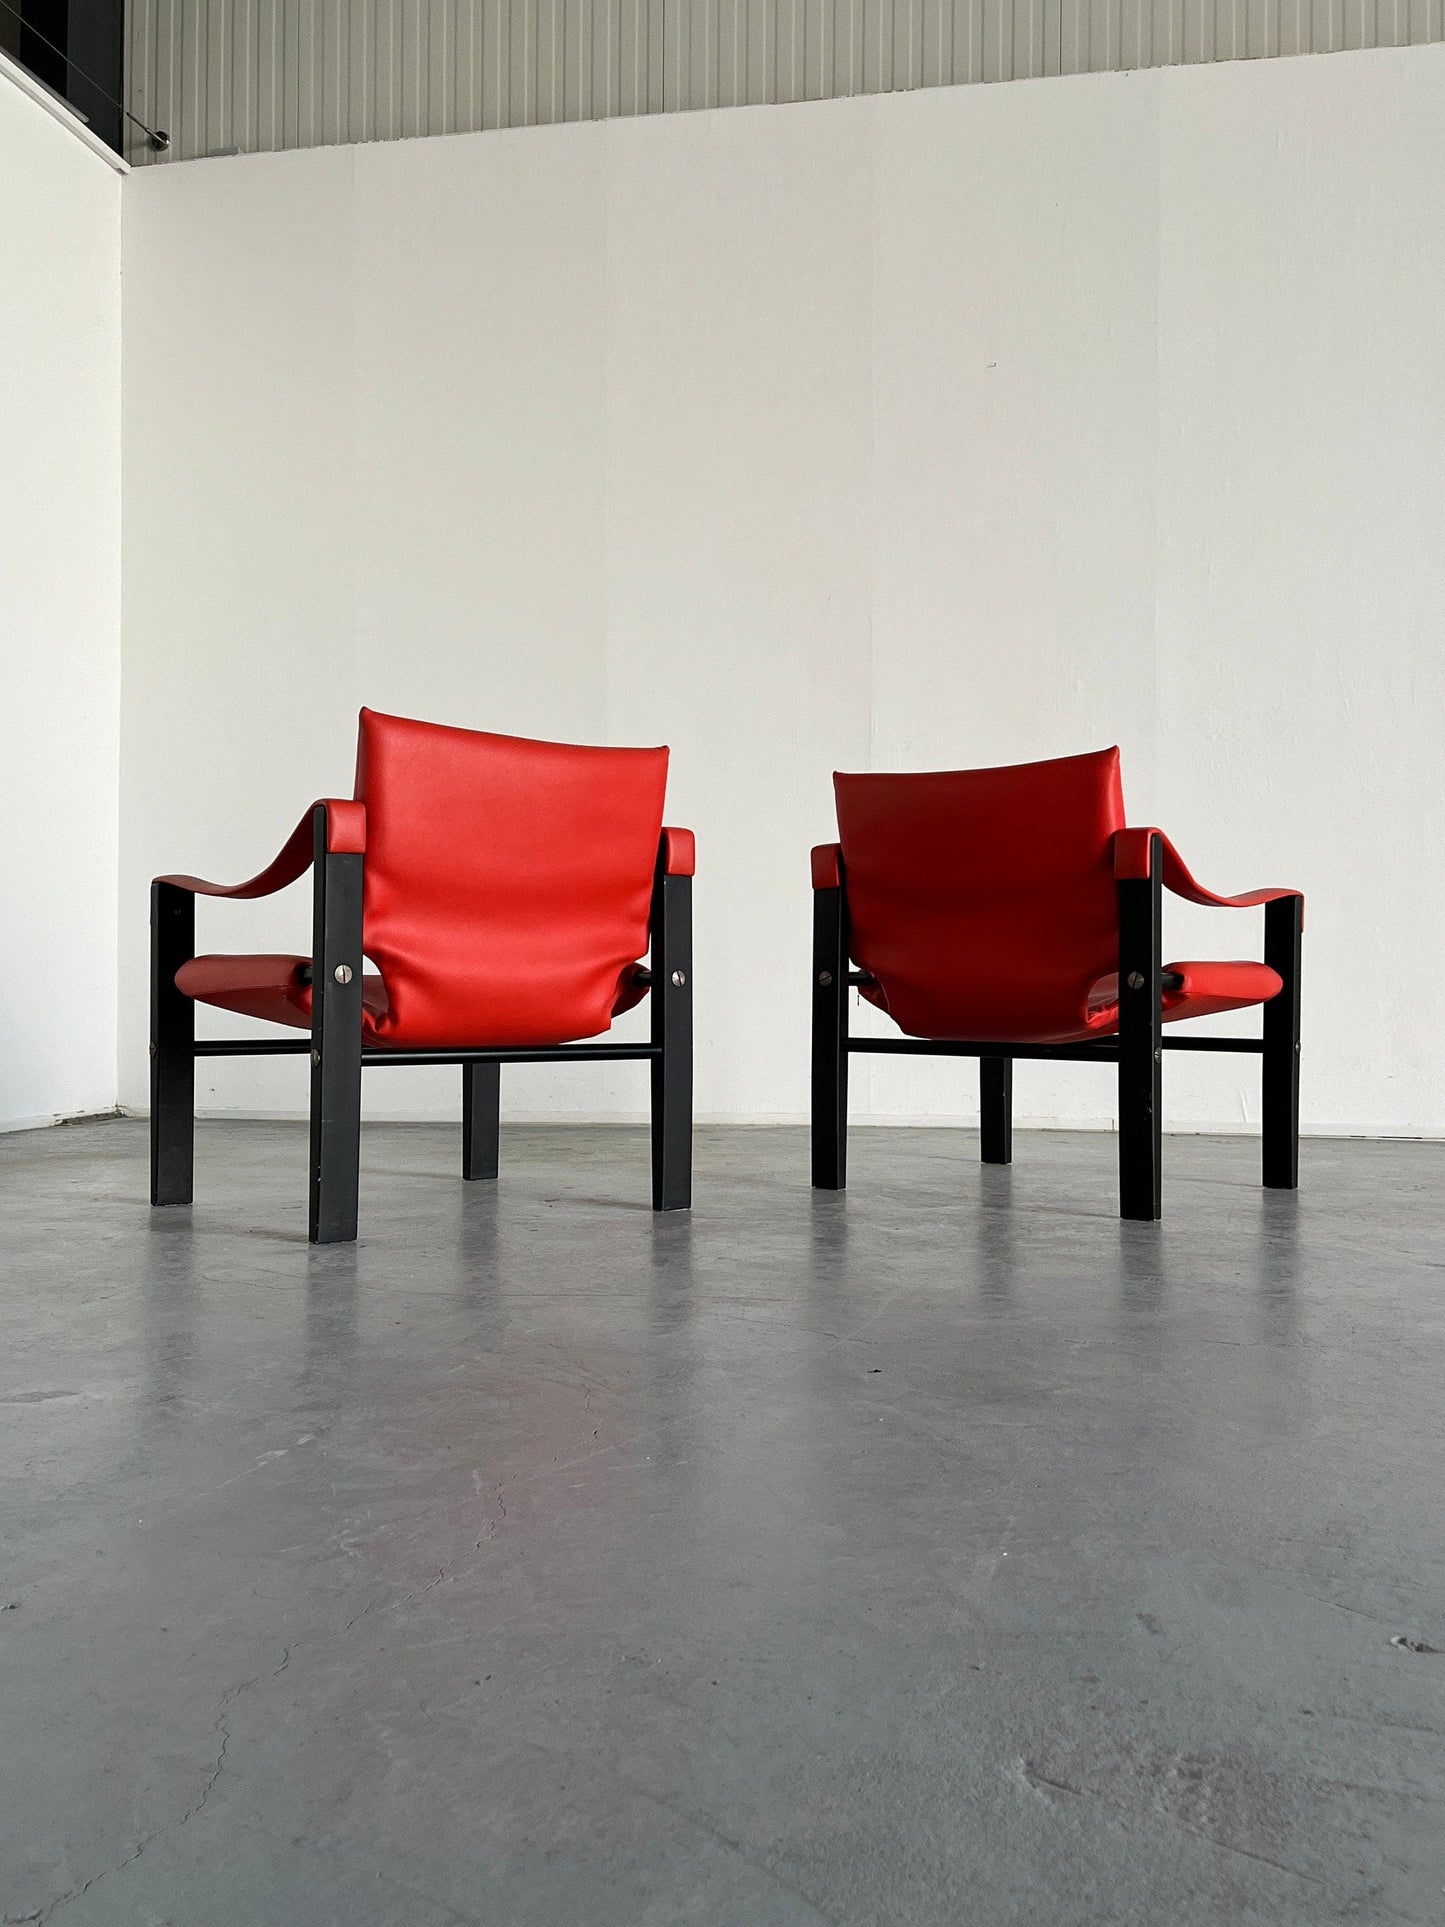 Set of 2 Mid-Century Modern Safari Armchair by Maurice Burke for Arkana, red faux leather and teak, 1970s seating furniture vintage